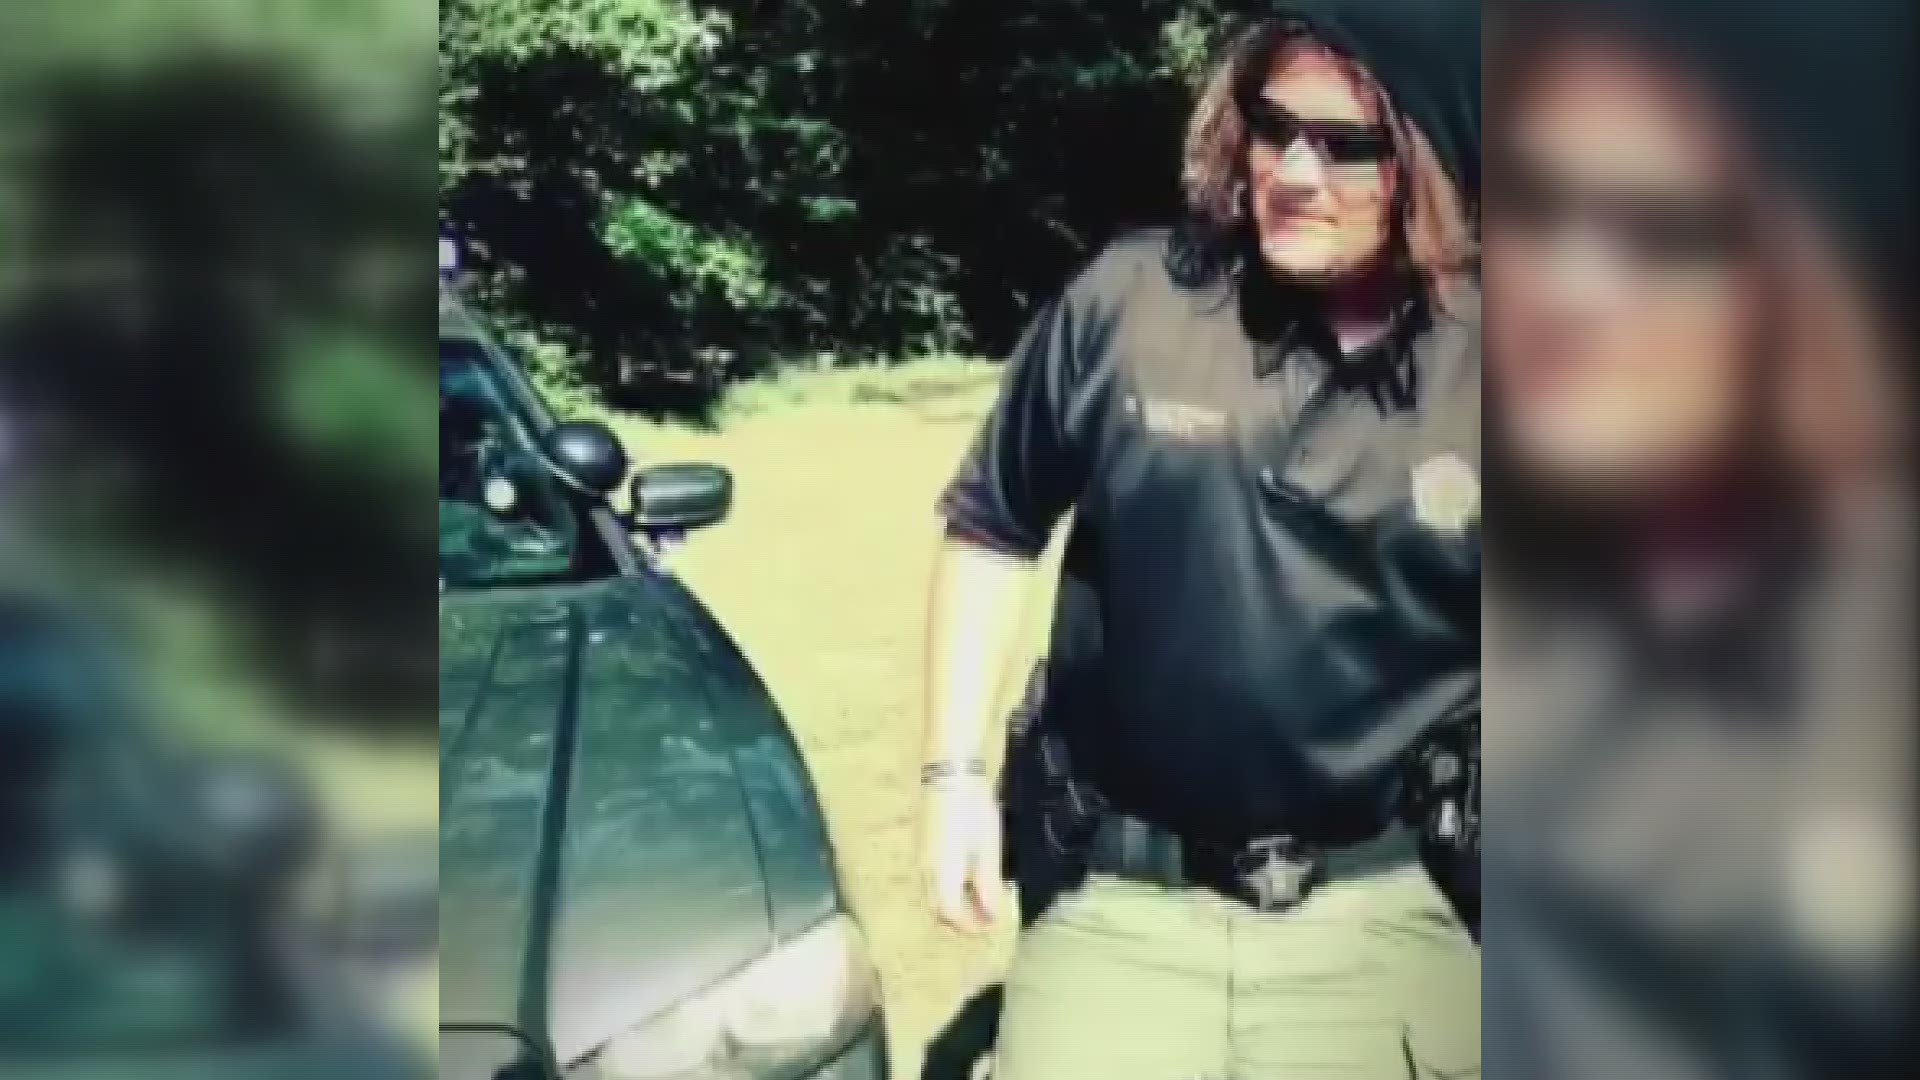 Deputies in Dallas County, Arkansas may have just won the lip-sync challenge with this video. (Credit: Jacob Cain)